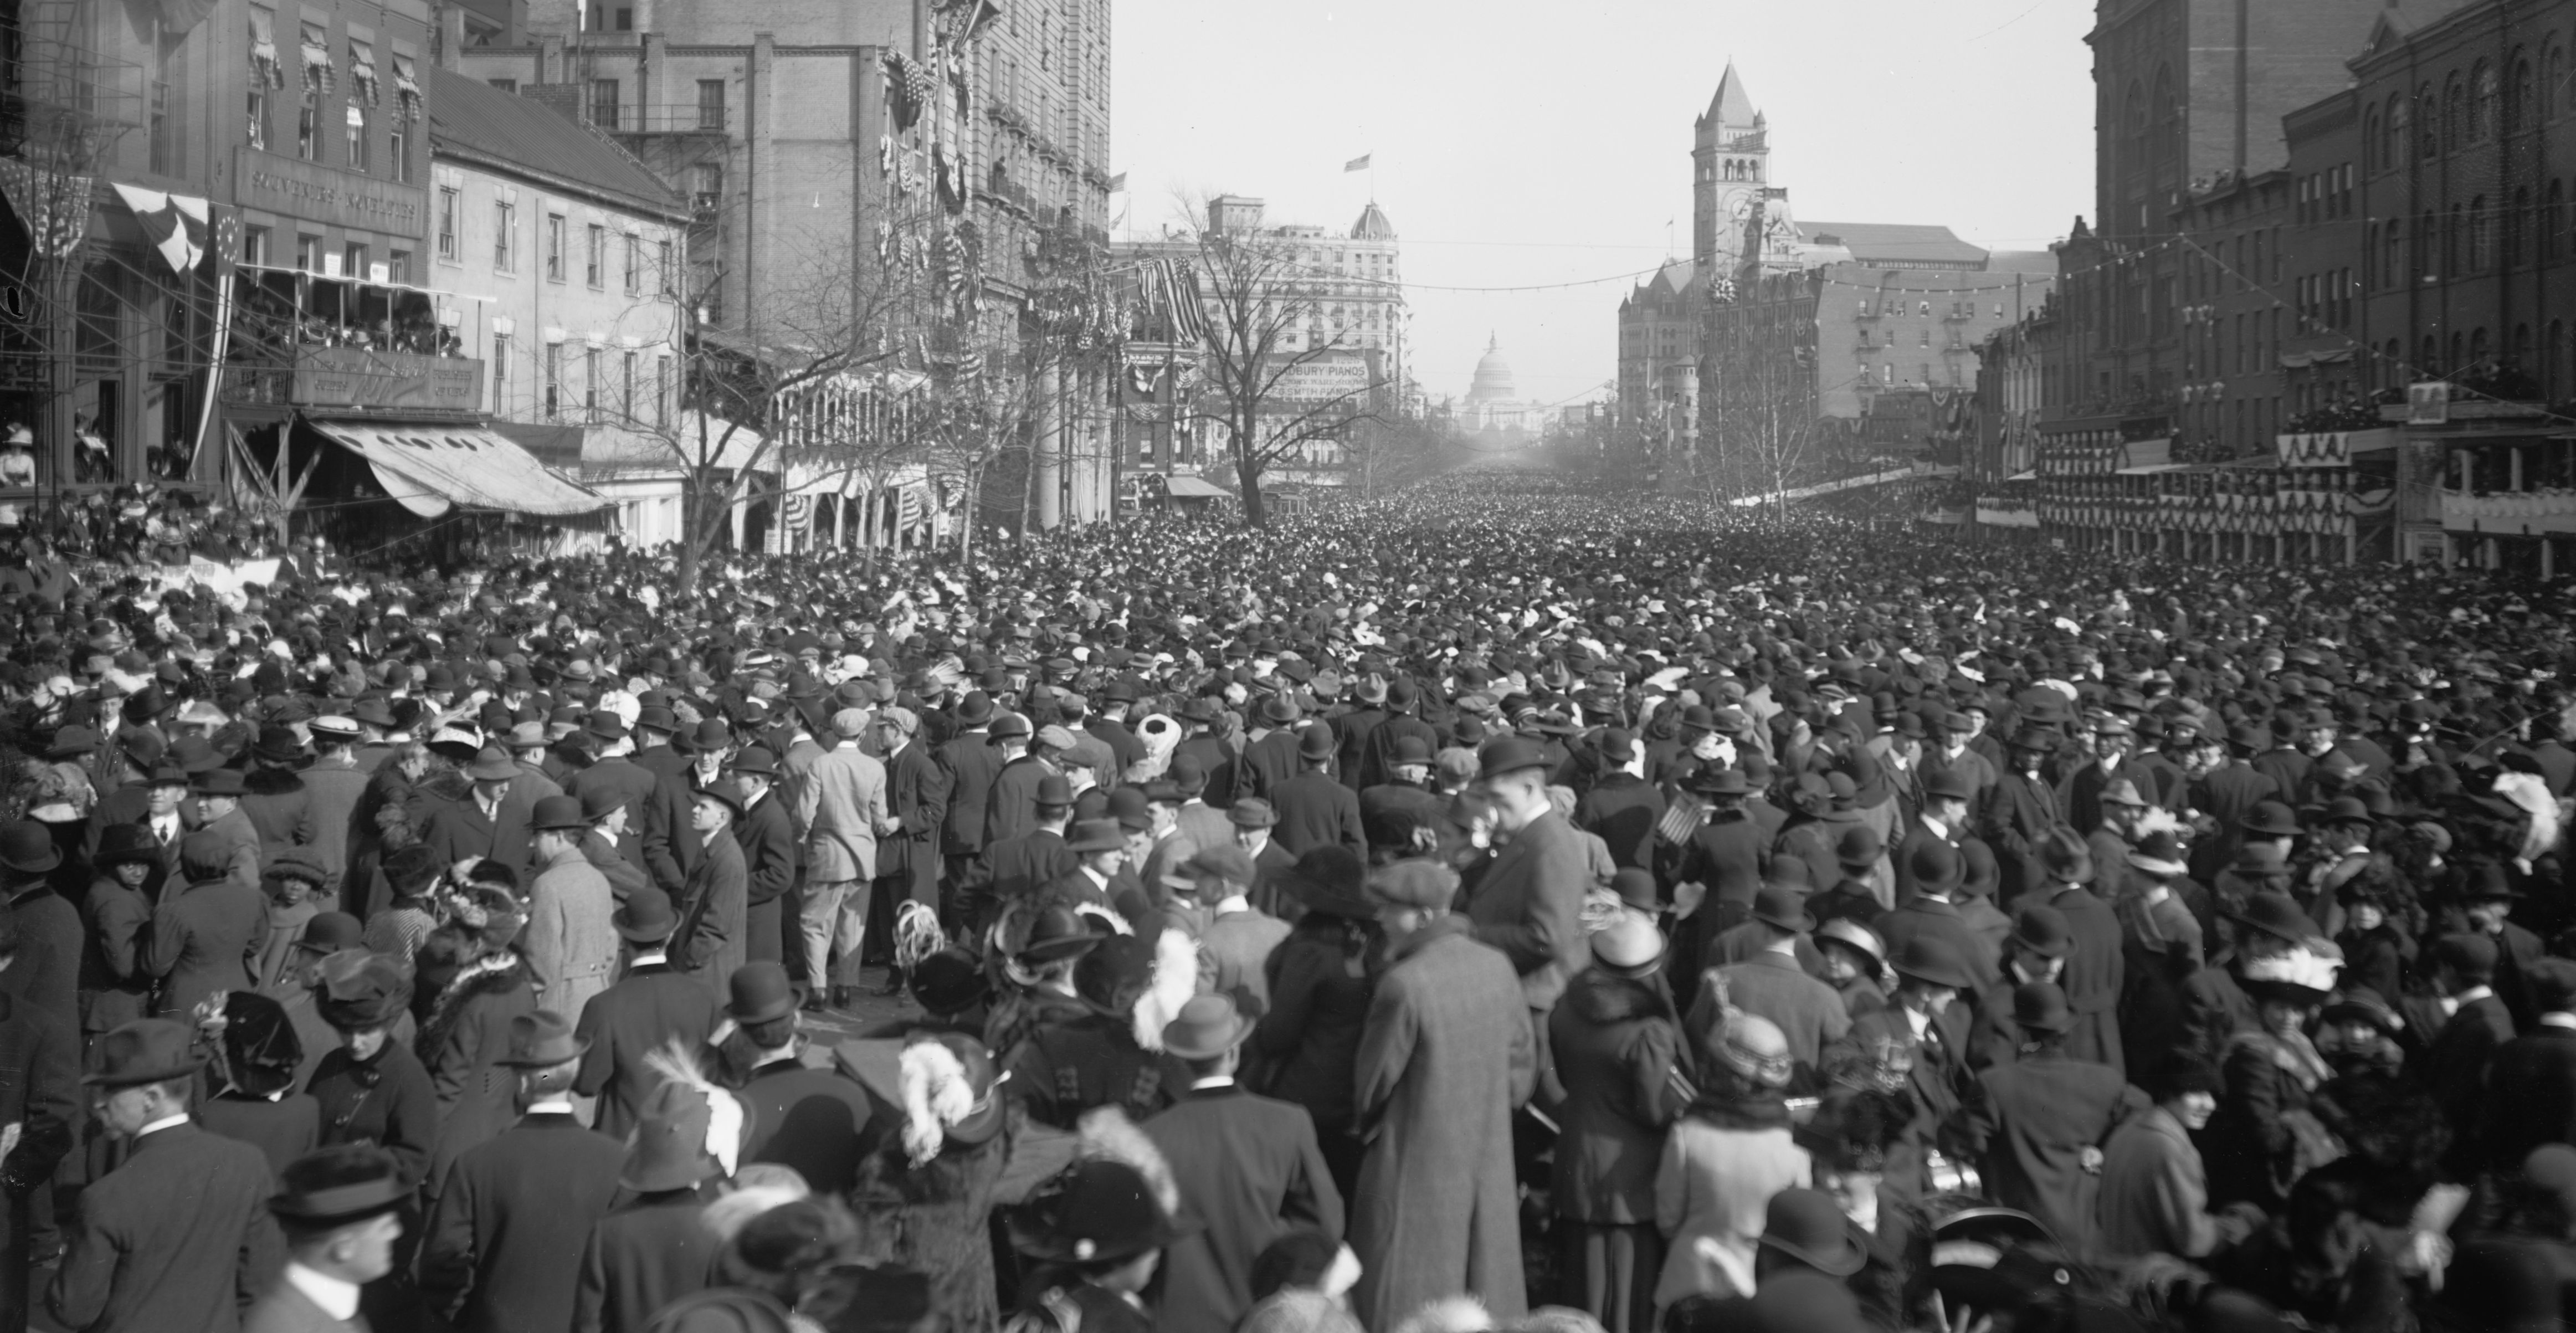 An enormous crowd of men blocked the route down Pennsylvania Avenue. Library of Congress